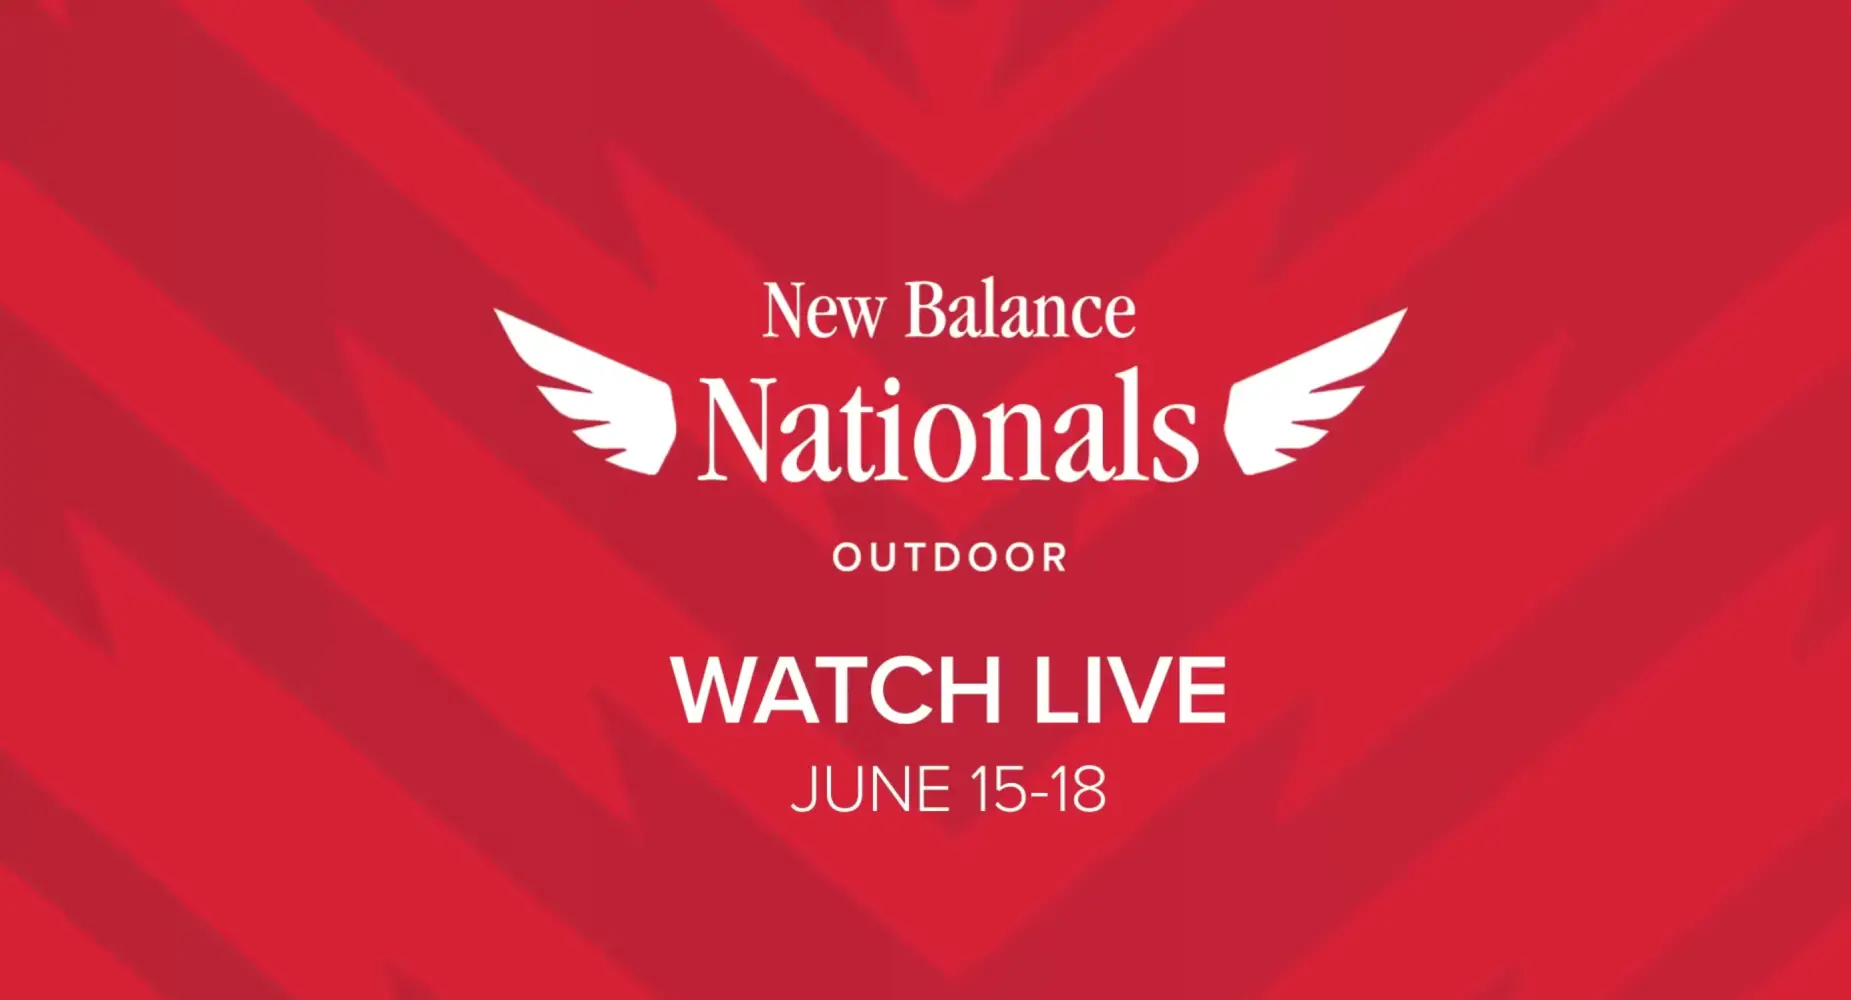 How to watch the 2023 New Balance Nationals Outdoor?